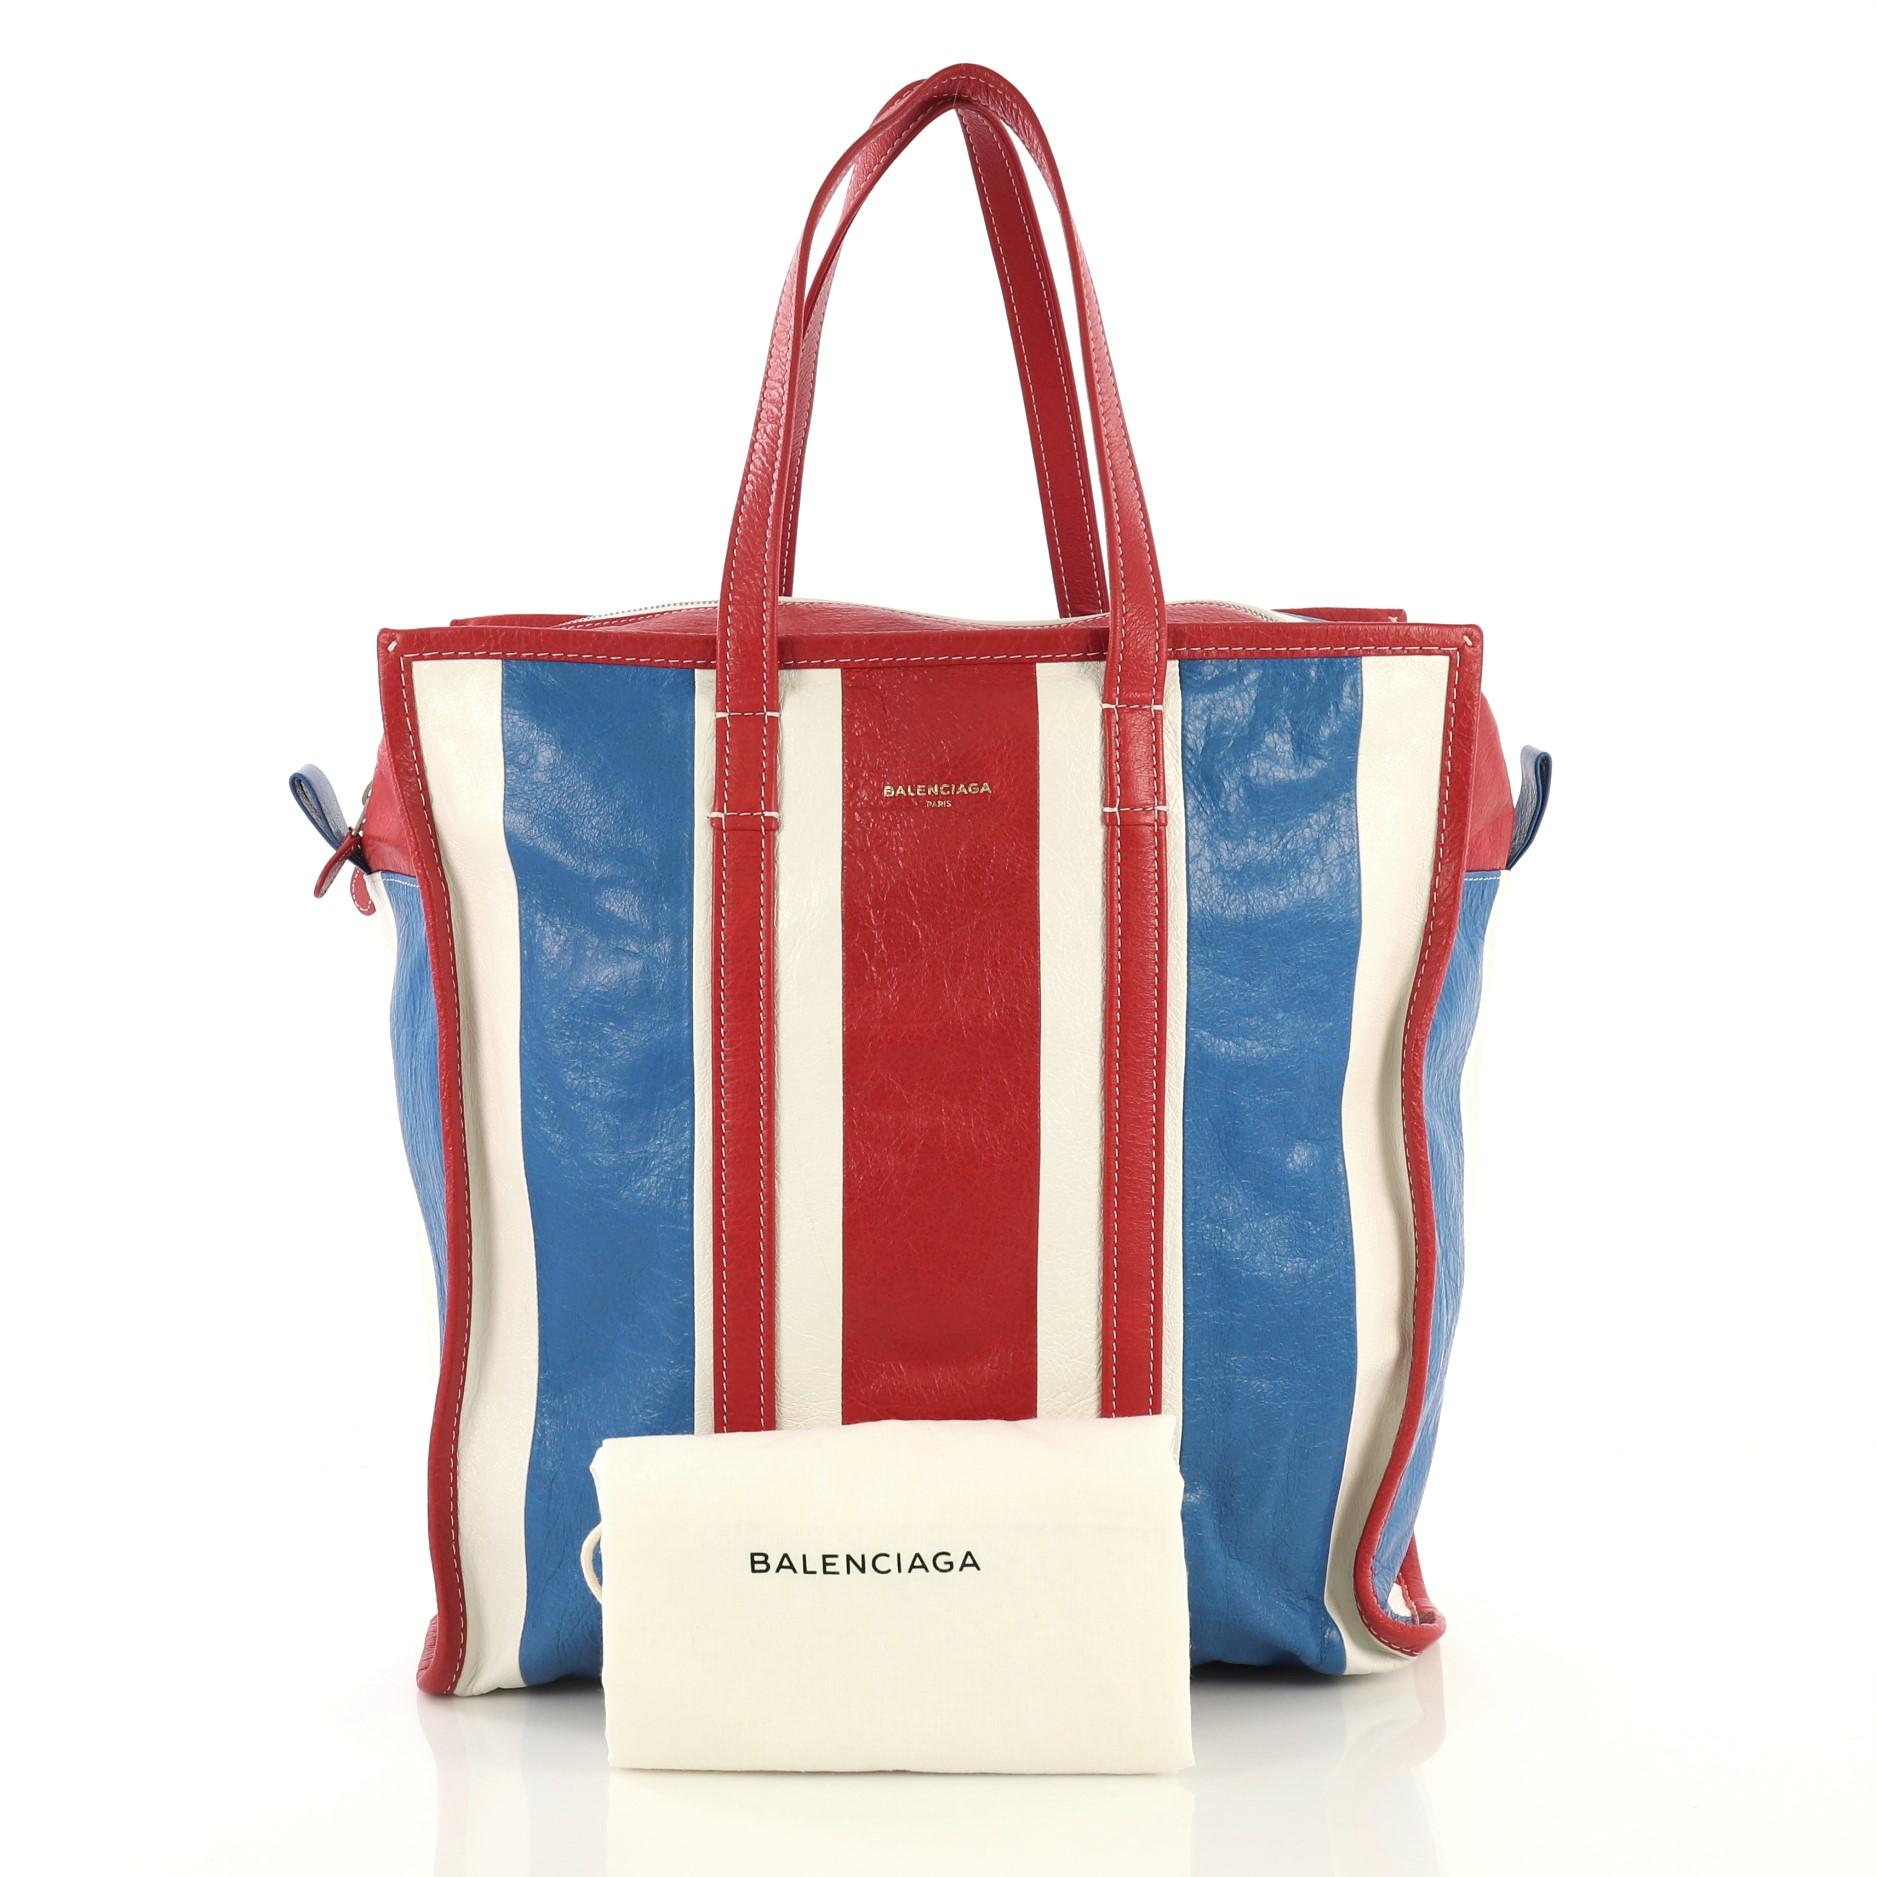 This Balenciaga Bazar Tote Striped Leather Medium, crafted in white, red and blue striped leather, features dual flat leather handles, contrast stitching, and silver-tone hardware. Its zip closure opens to a black fabric interior with zip and slip